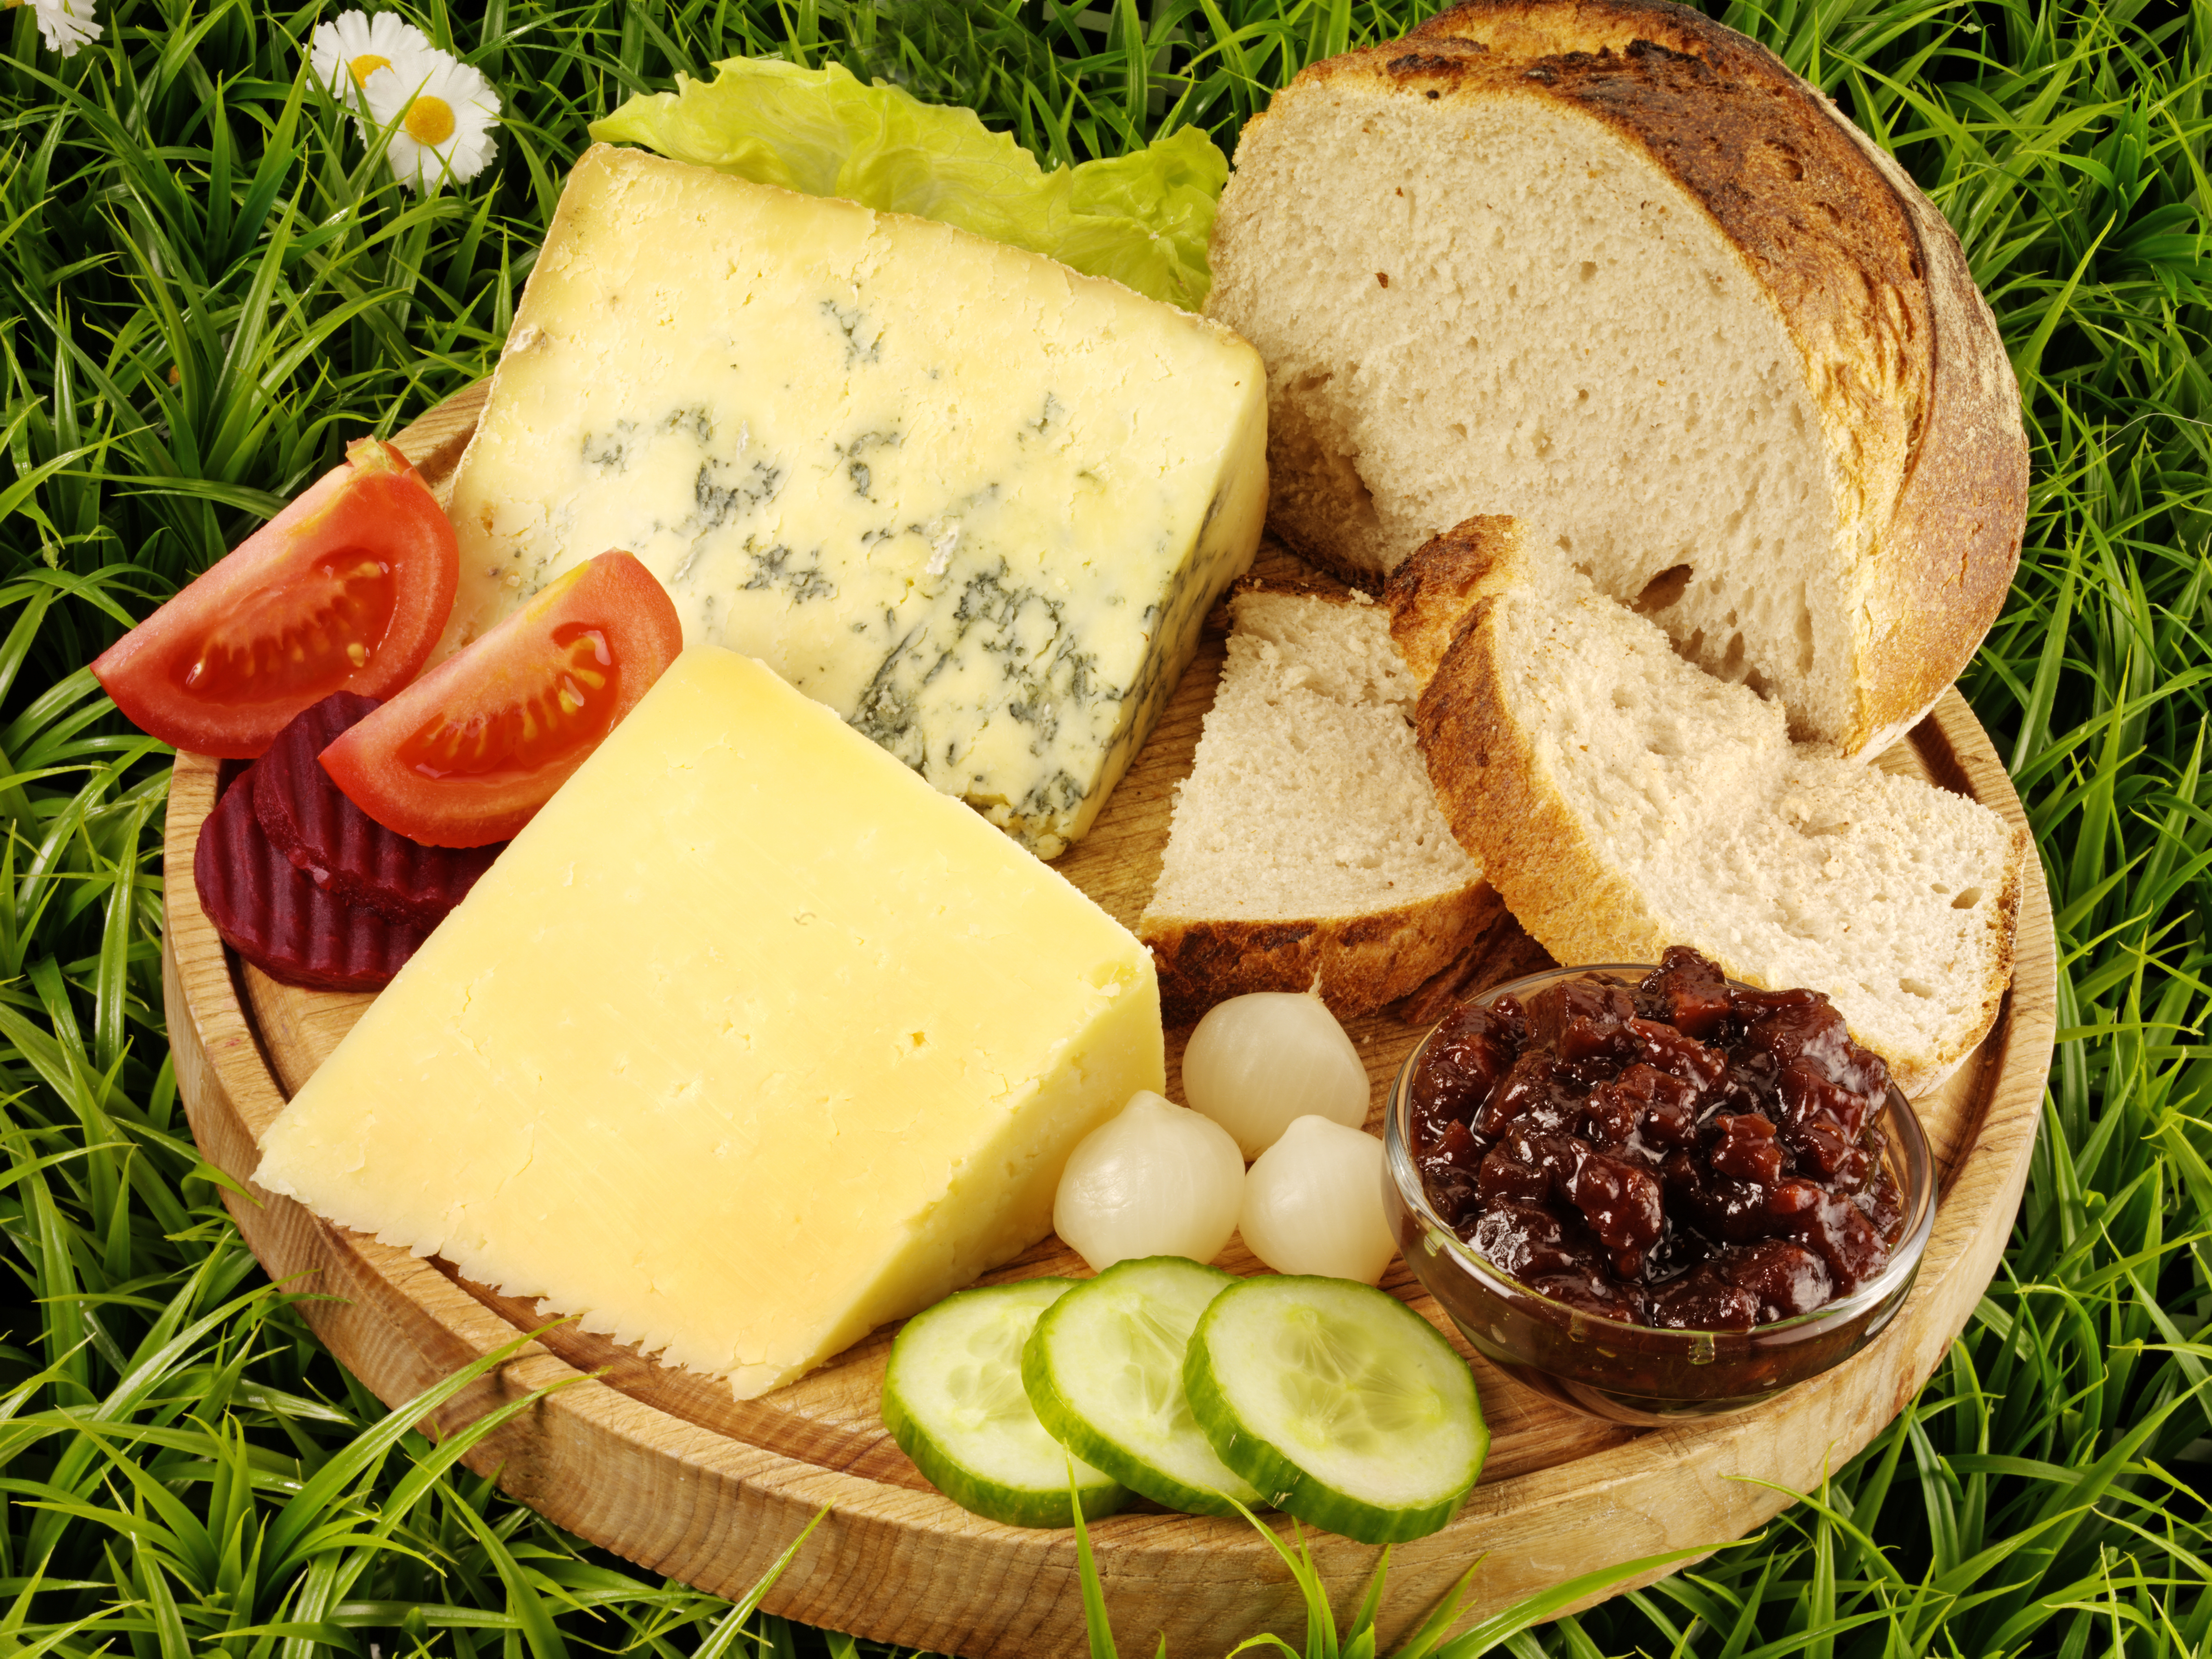 Ploughman's Lunch～From the United Kingdom